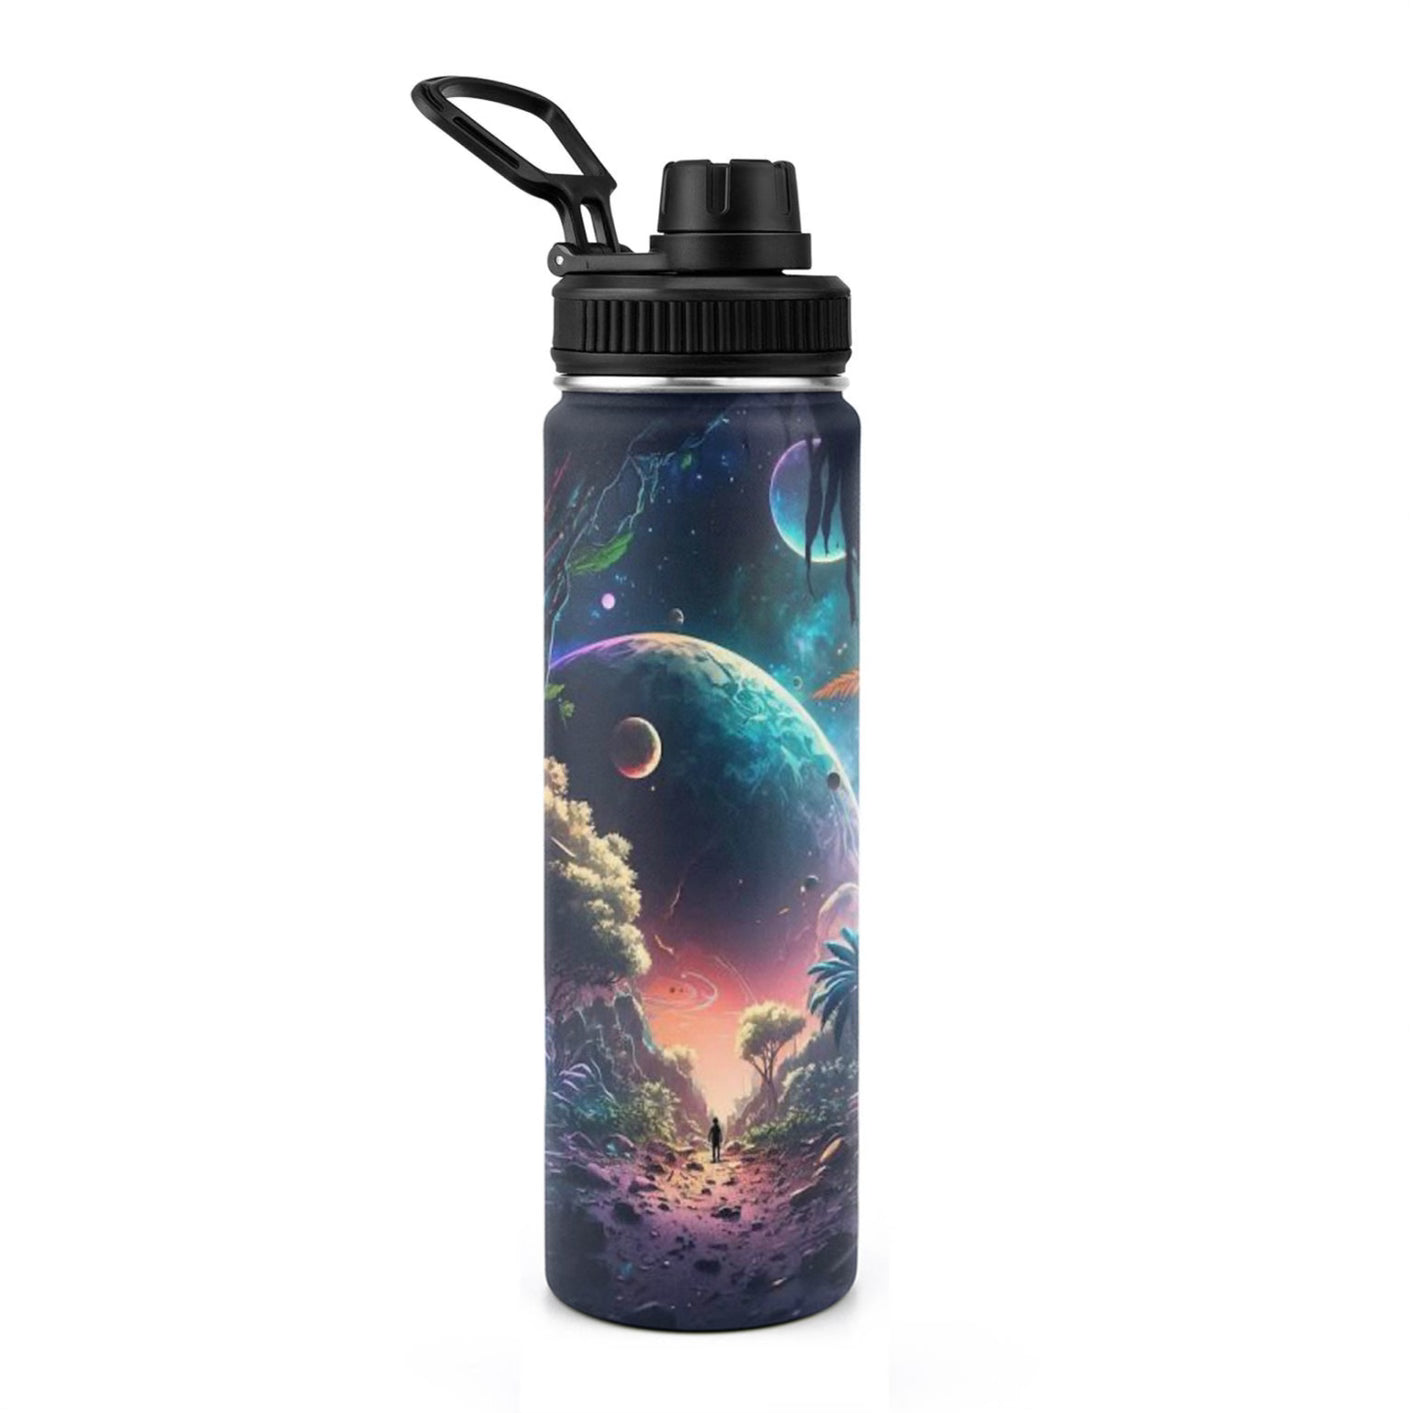 Stainless Steel Insulated Water Bottle with Spout Lid 25oz